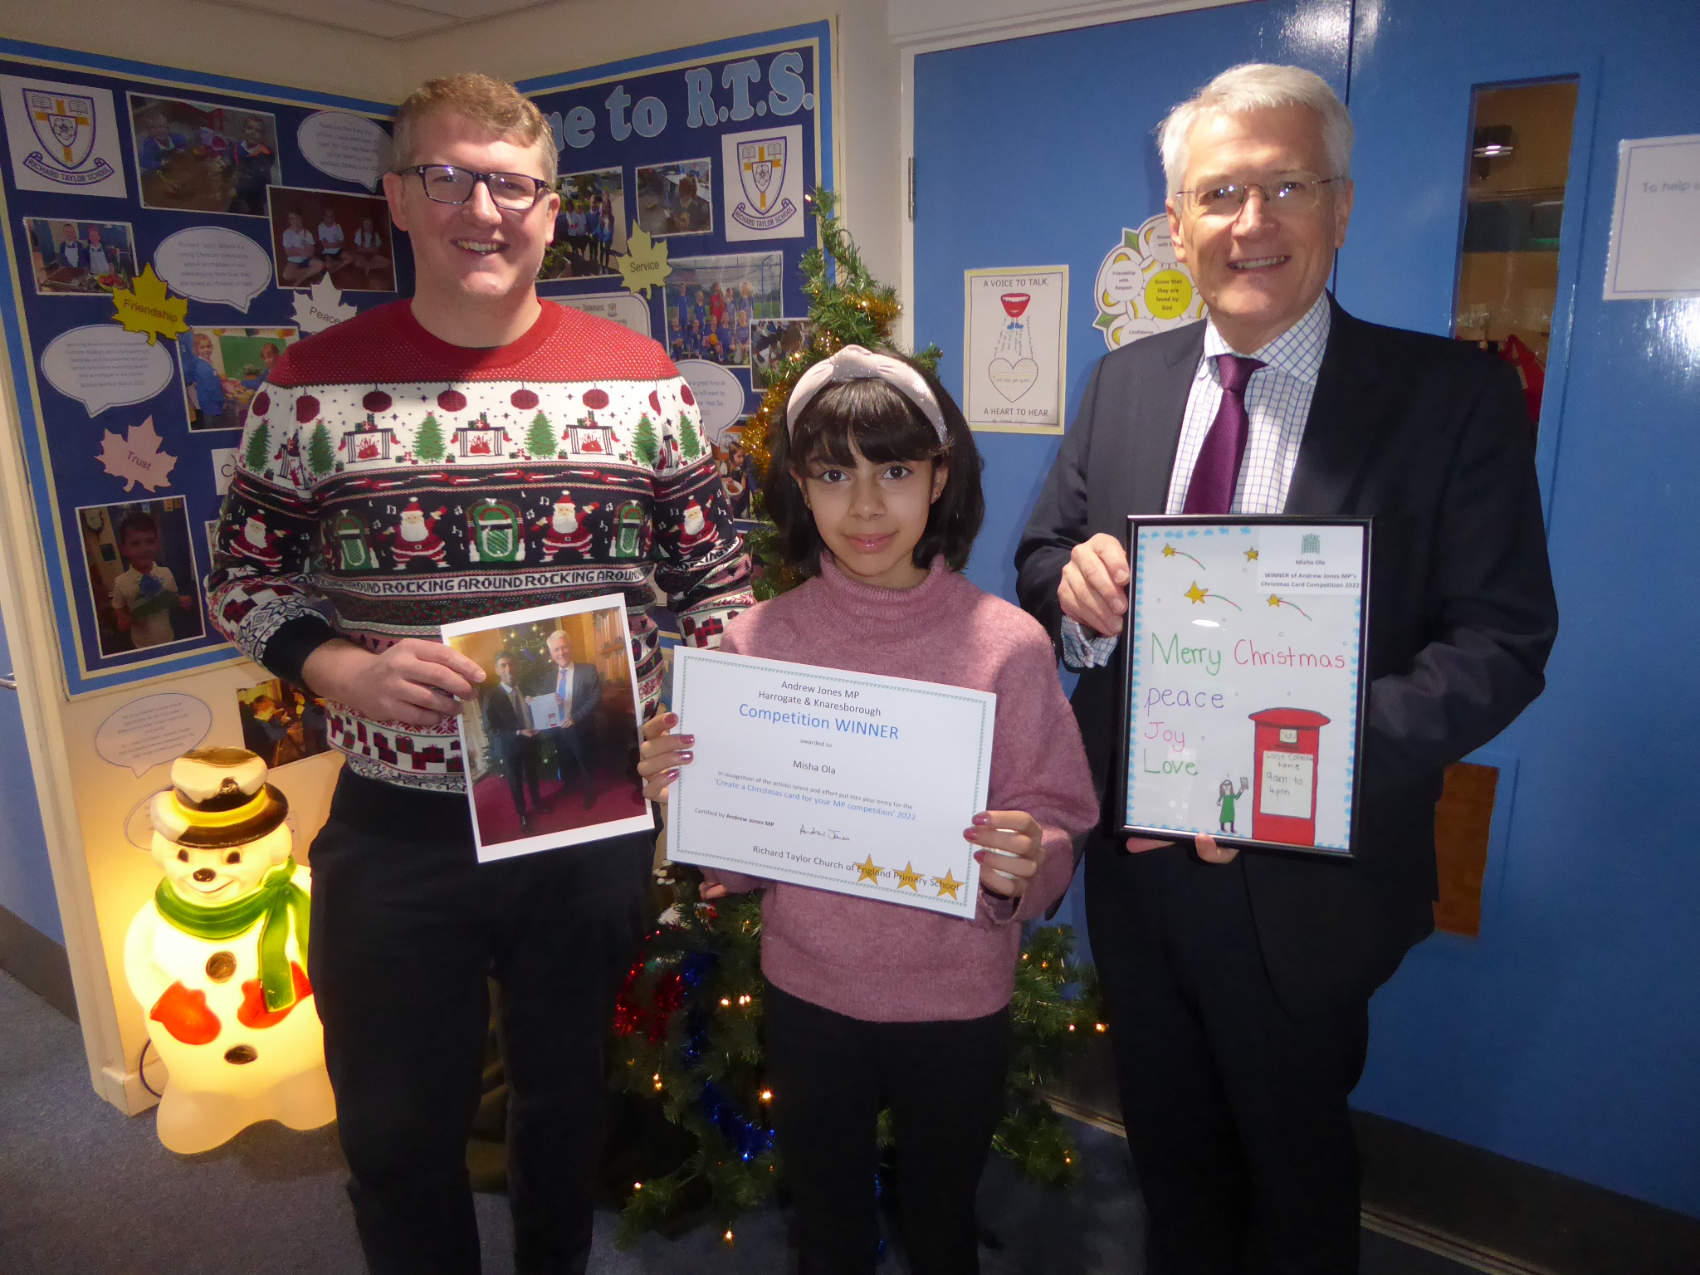 Andrew and Richard Taylor Headteacher Andrew Symonds present Misha with her framed winning card and certificate